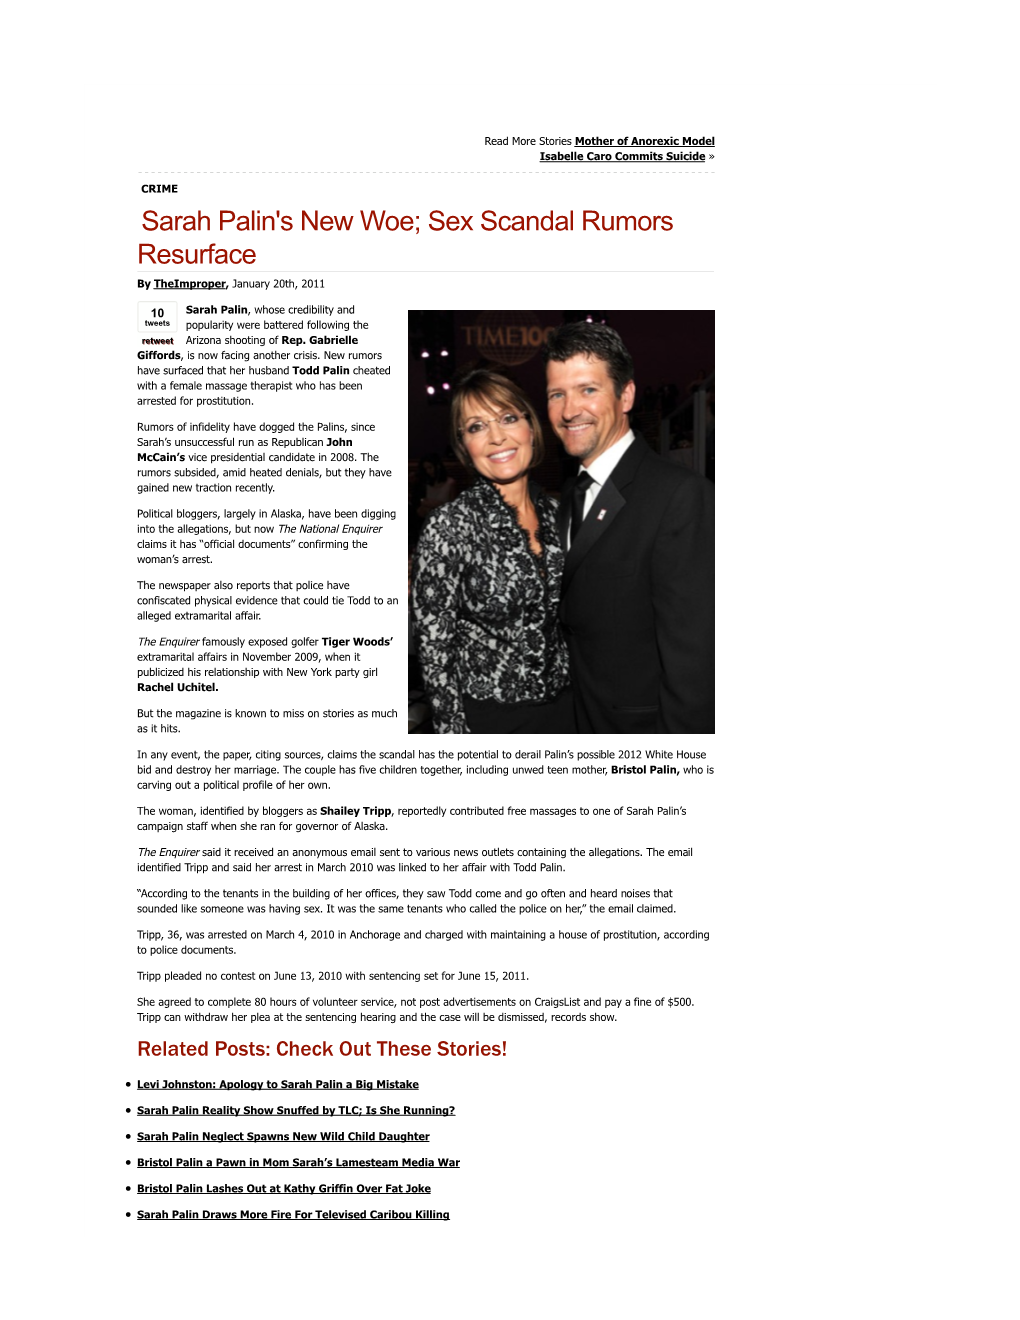 Sarah Palin's New Woe; Sex Scandal Rumors Resurface by Theimproper, January 20Th, 2011